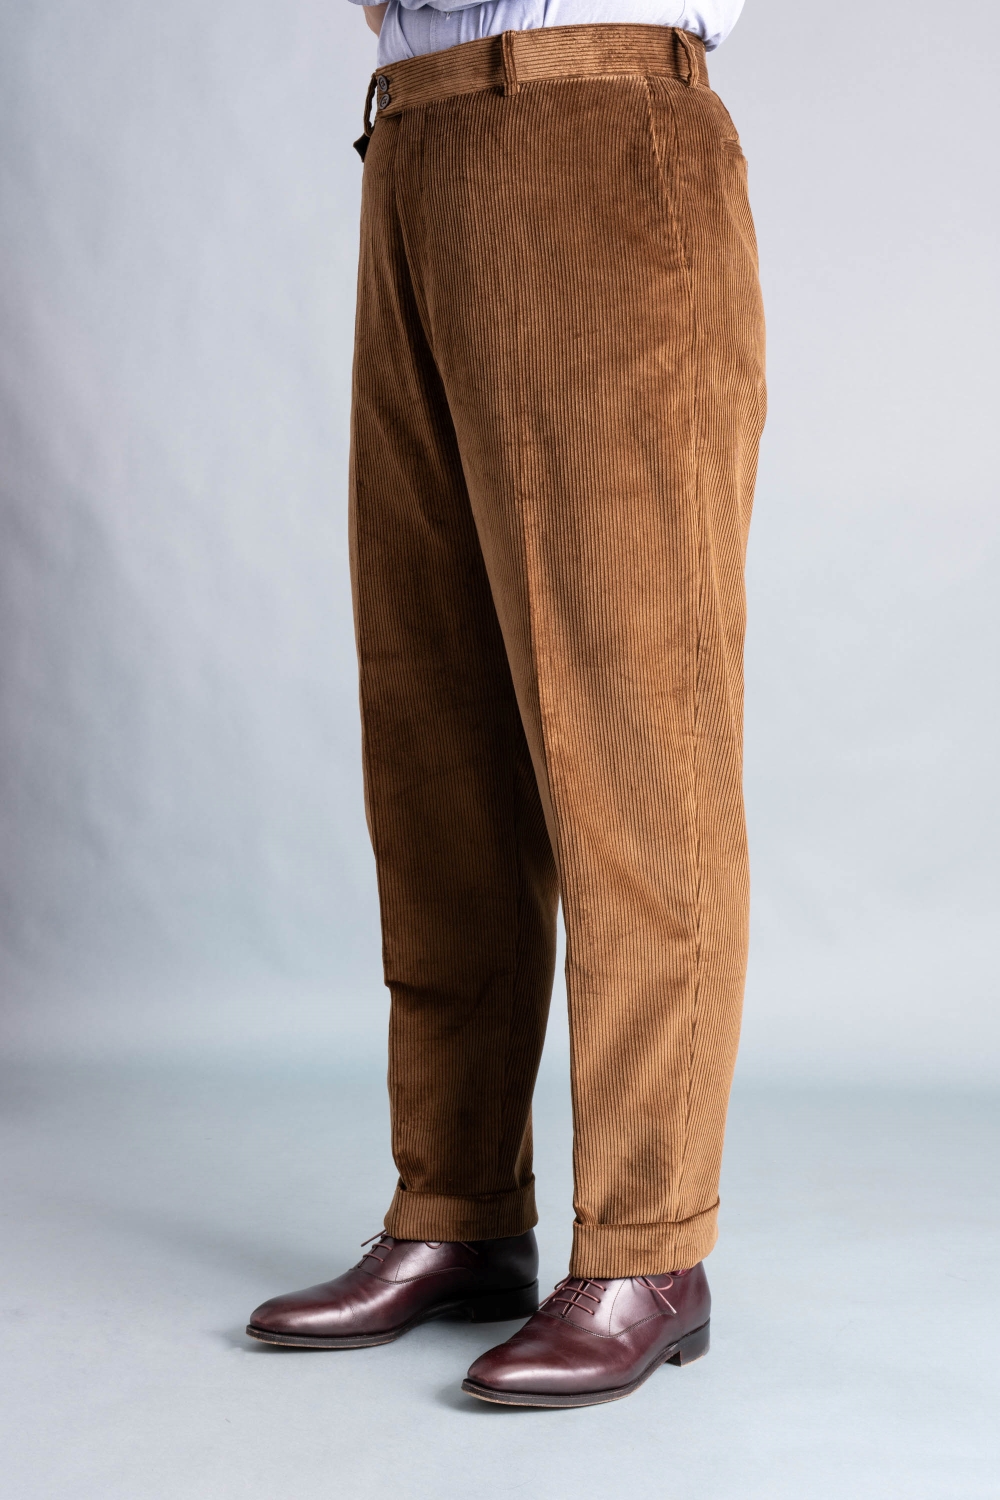 JB Britches Jb Britches Flat Front Corduroy Trousers, $145 | Nordstrom Rack  | Lookastic